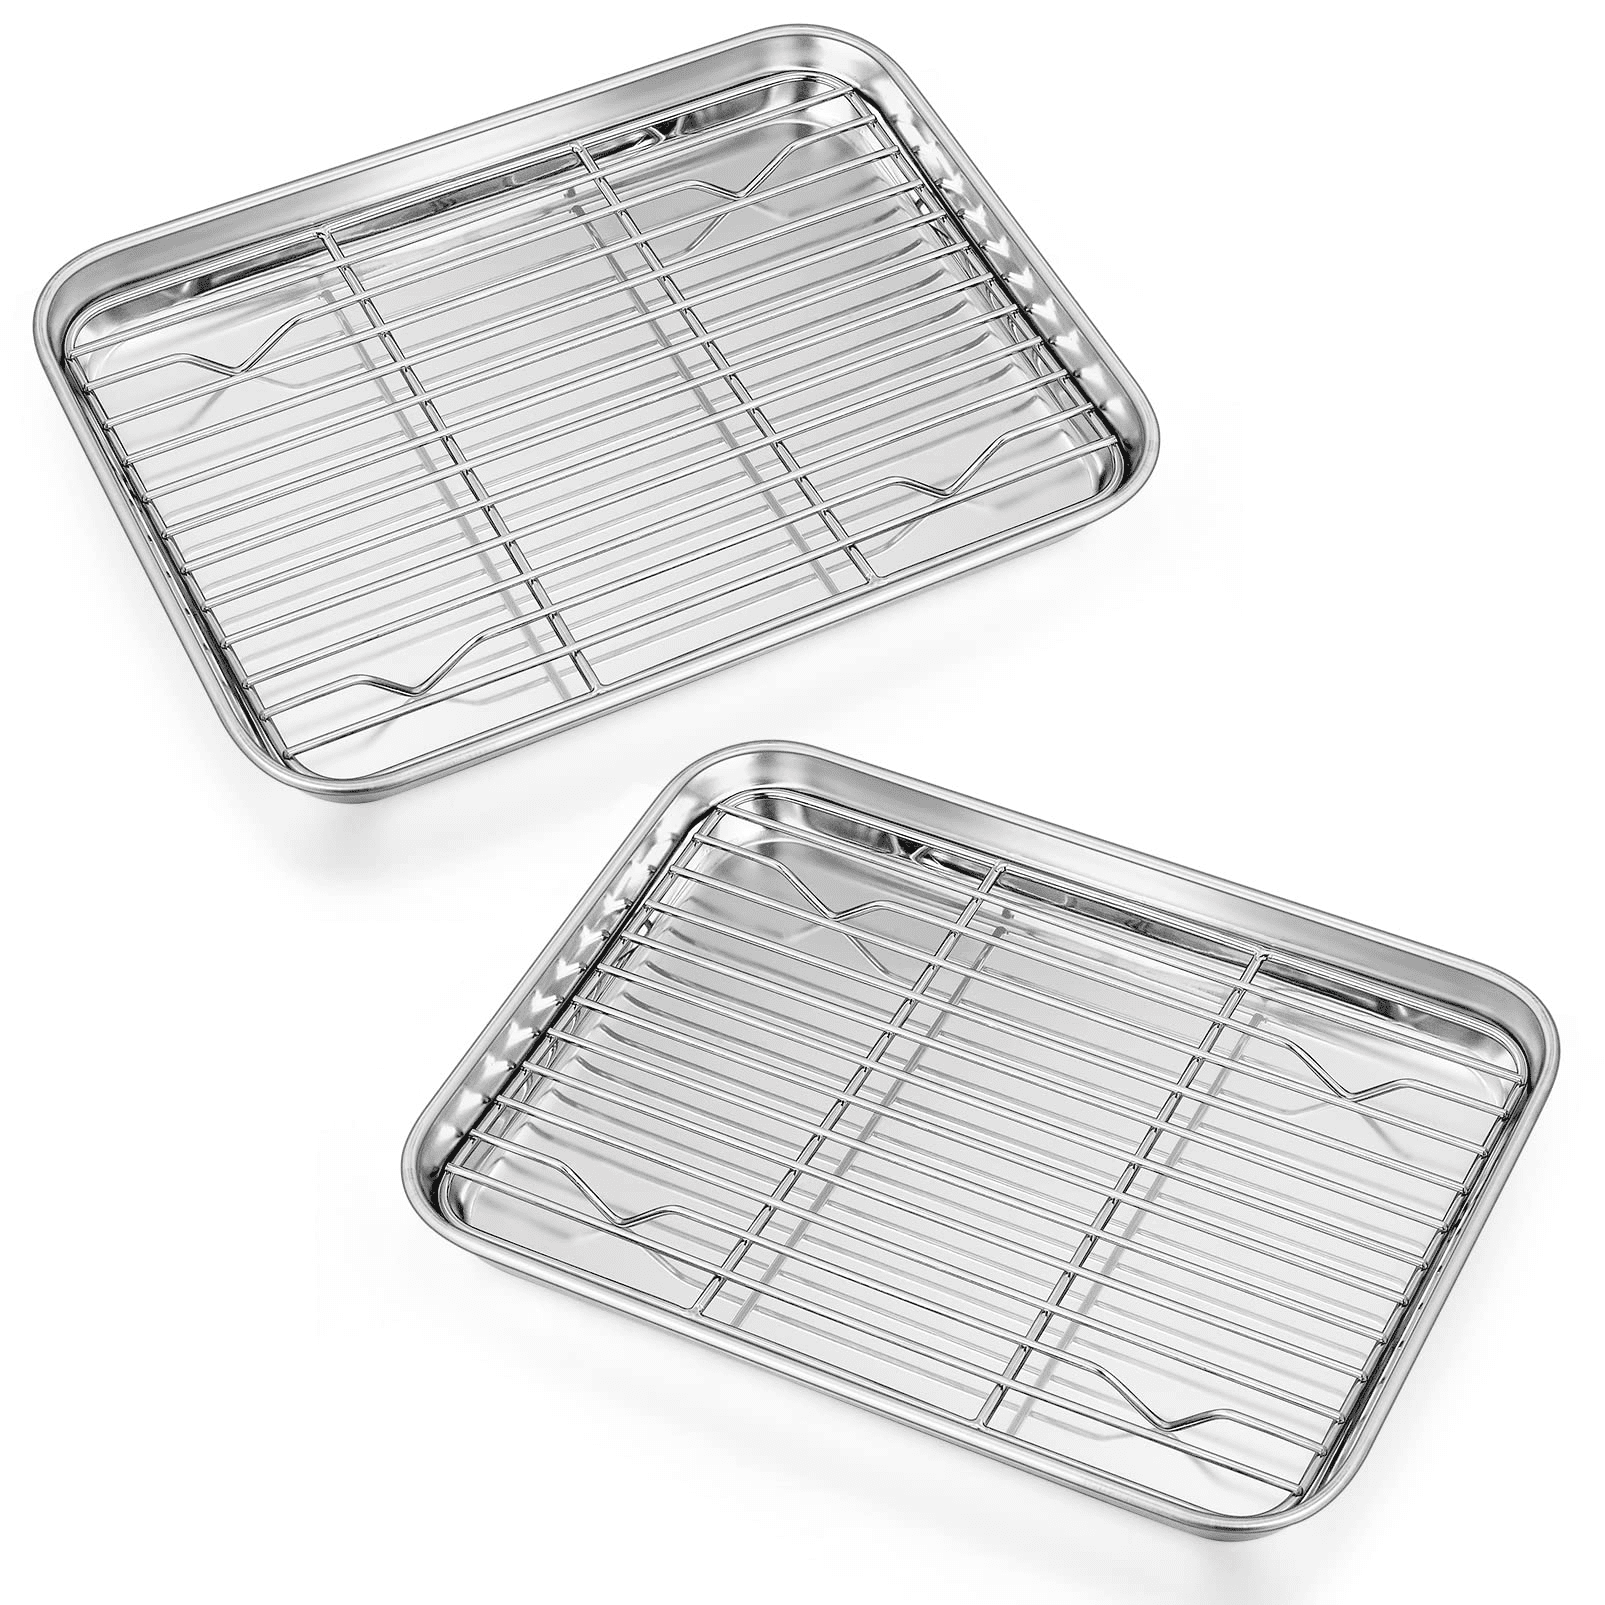 Toaster Oven Tray with Rack Set (2 Pans + 2 Racks), Size 9'' x 7'' x 1'',  Stainless Steel Toaster Oven Pan and Rack for Baking, Cooking, Roasting or  Cooling, Healthy 